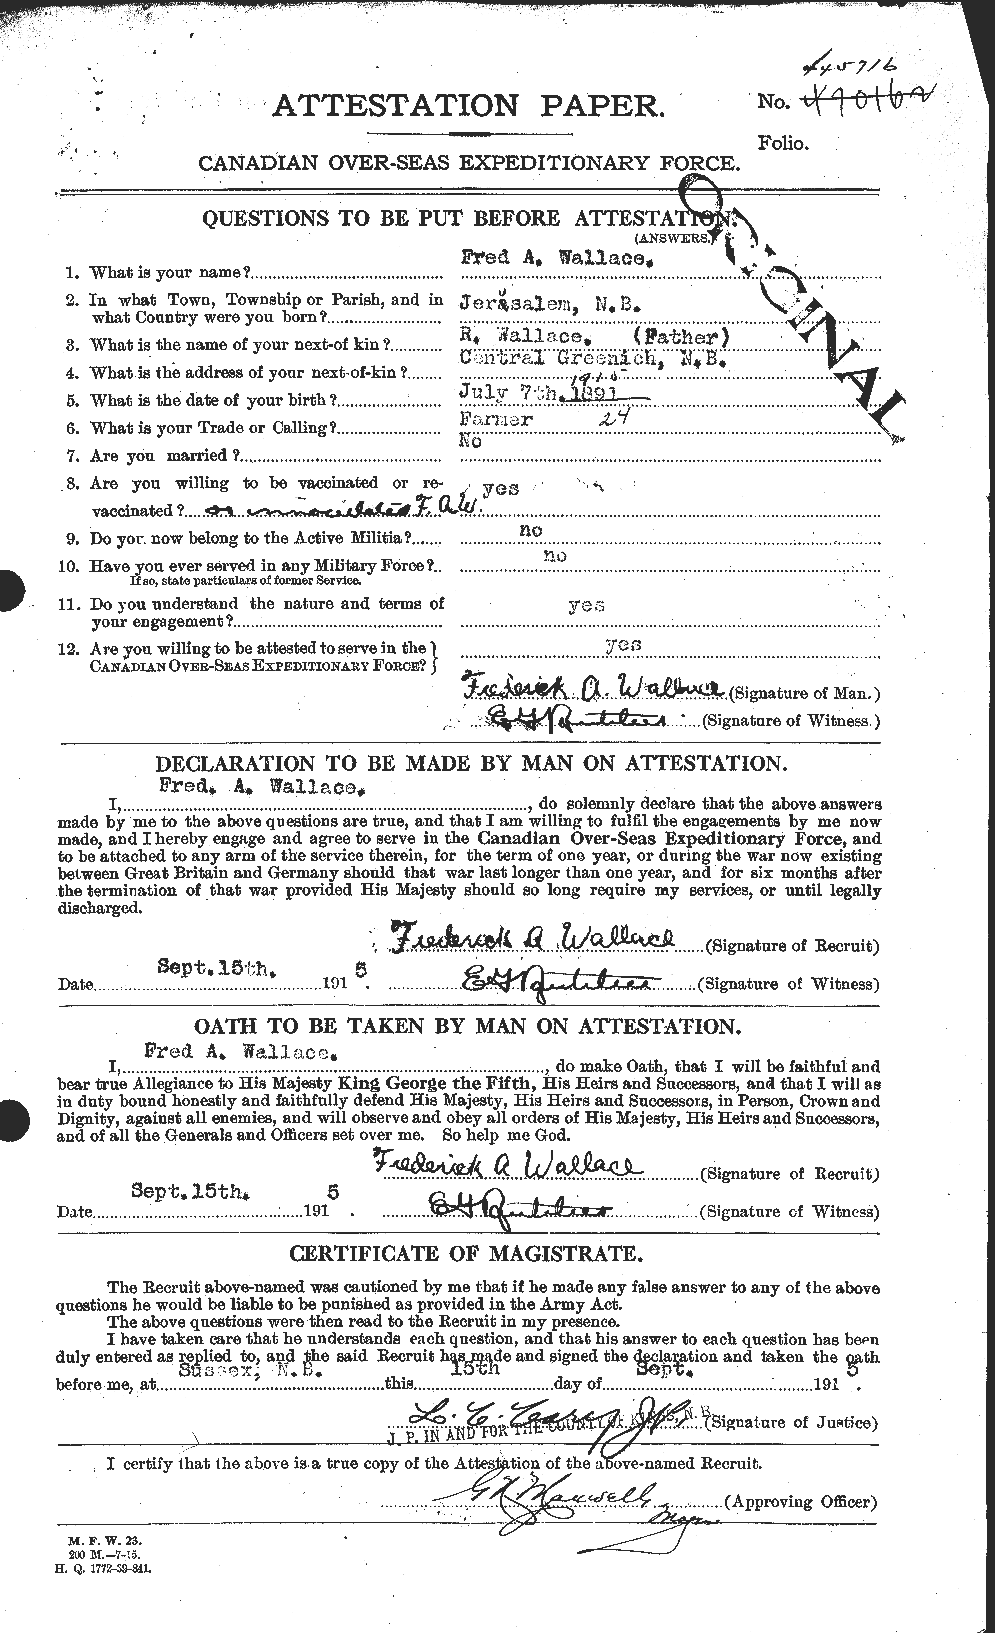 Personnel Records of the First World War - CEF 654427a